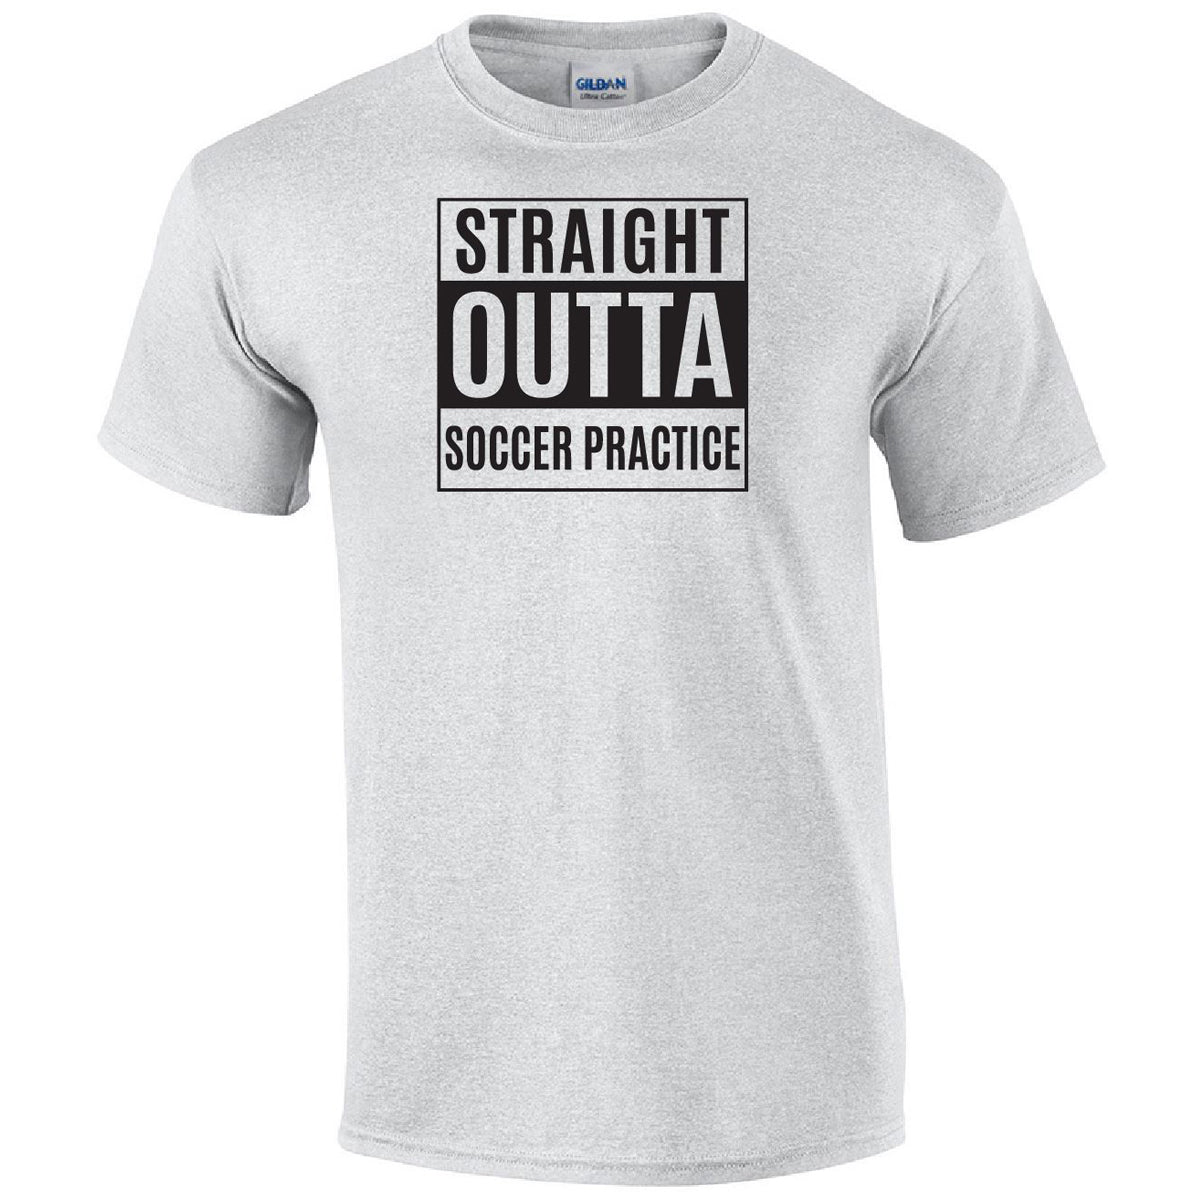 Straight Outta Soccer Practice Printed Tee Humorous Shirt 411 Youth Medium Ash 